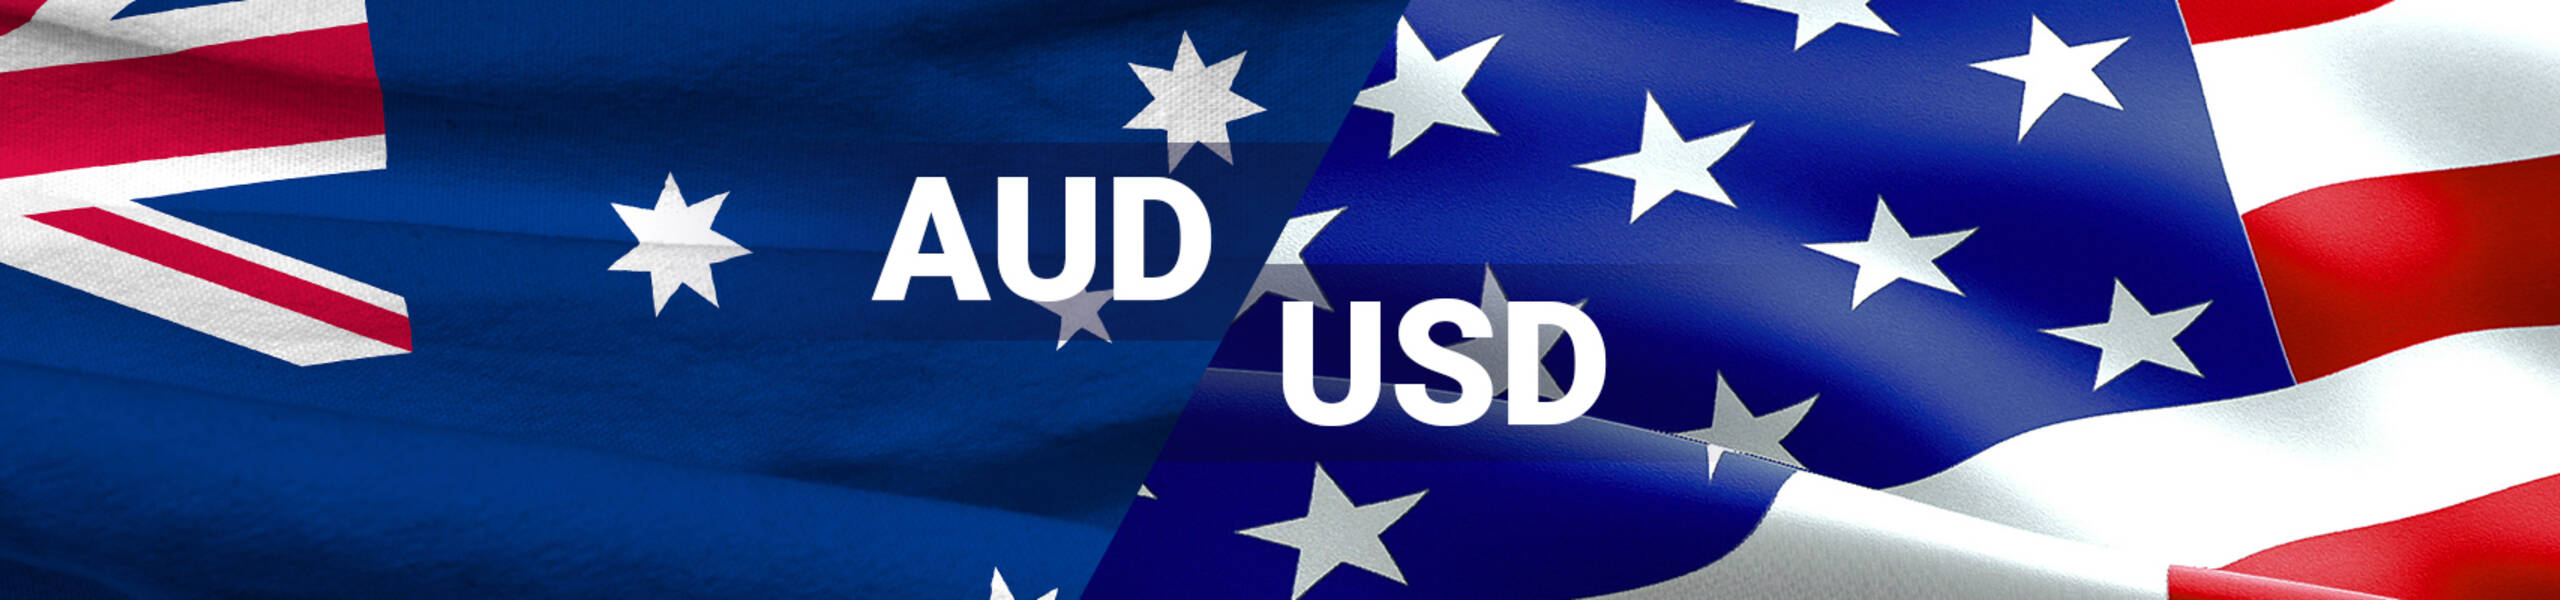 AUD/USD: Aussie had a slide on the Wolfe waves